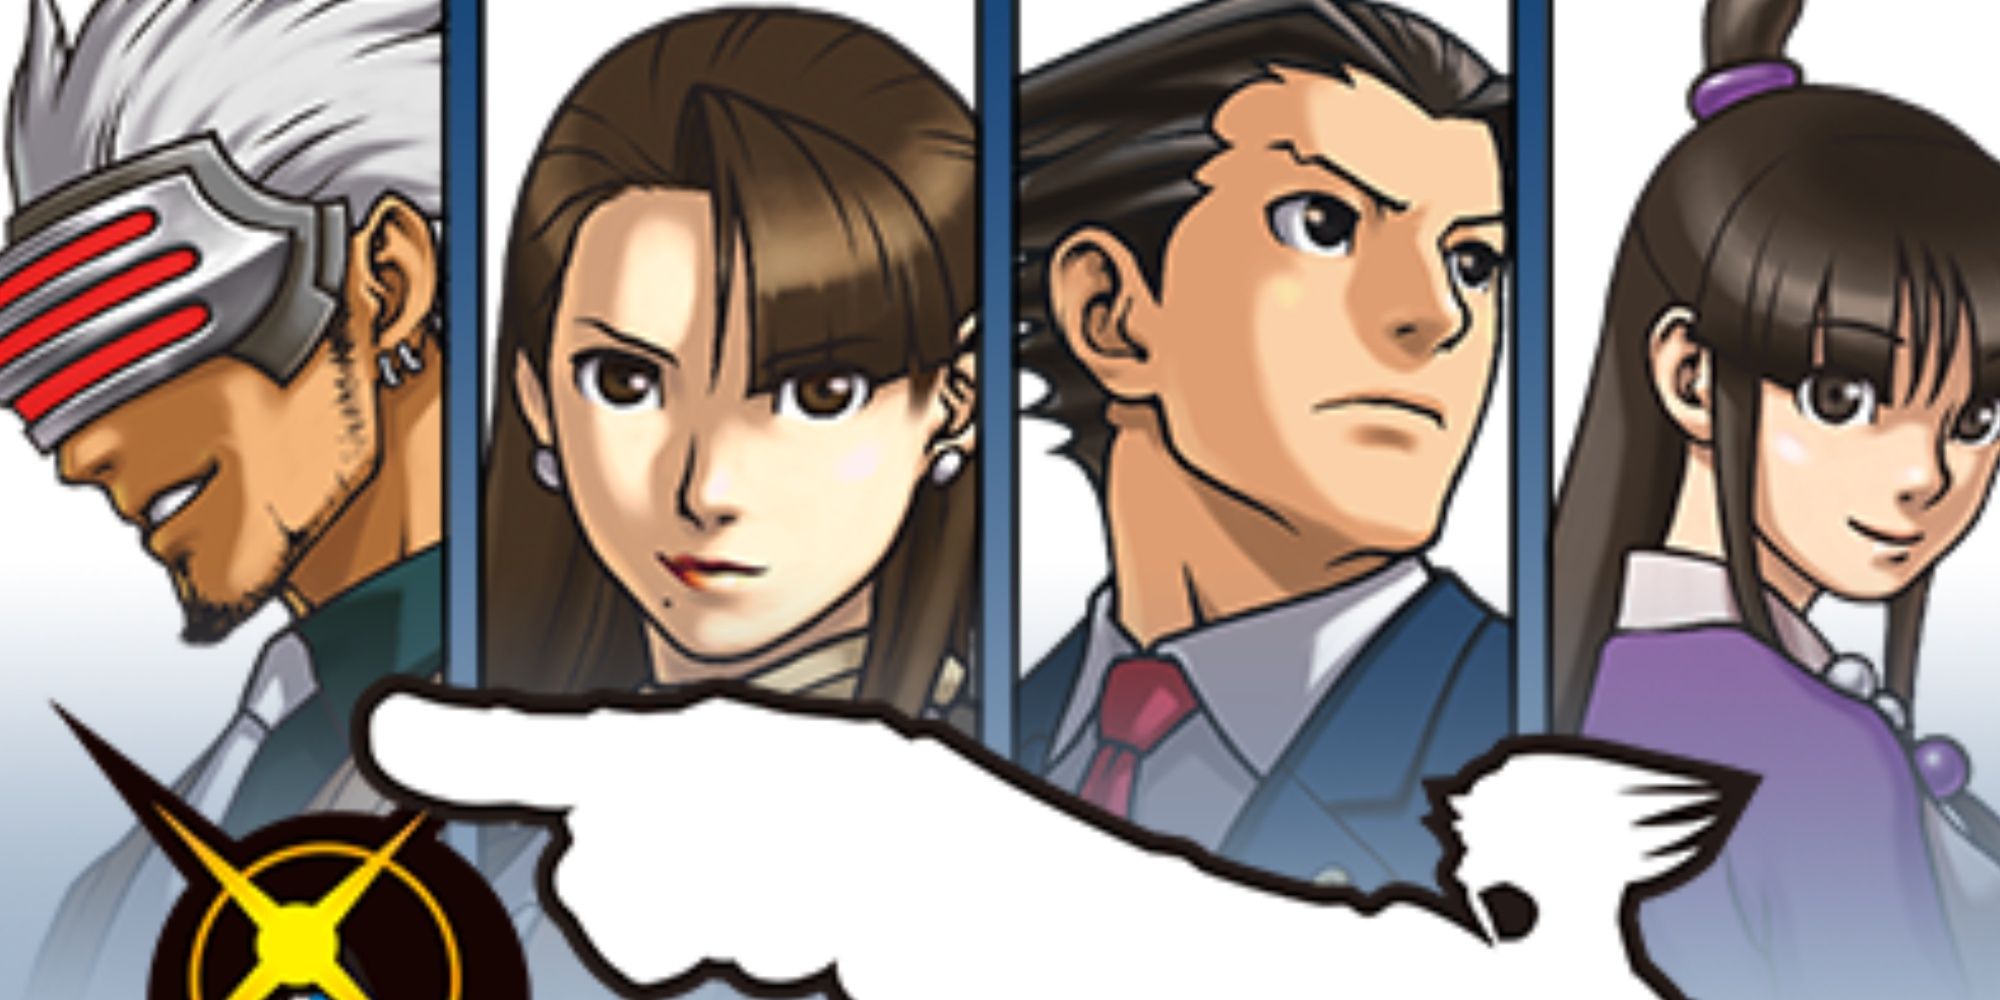 Godot, Mia Fey, Phoenix Wright, and Maya Fey in Ace Attorney Trials and Tribulations cover art